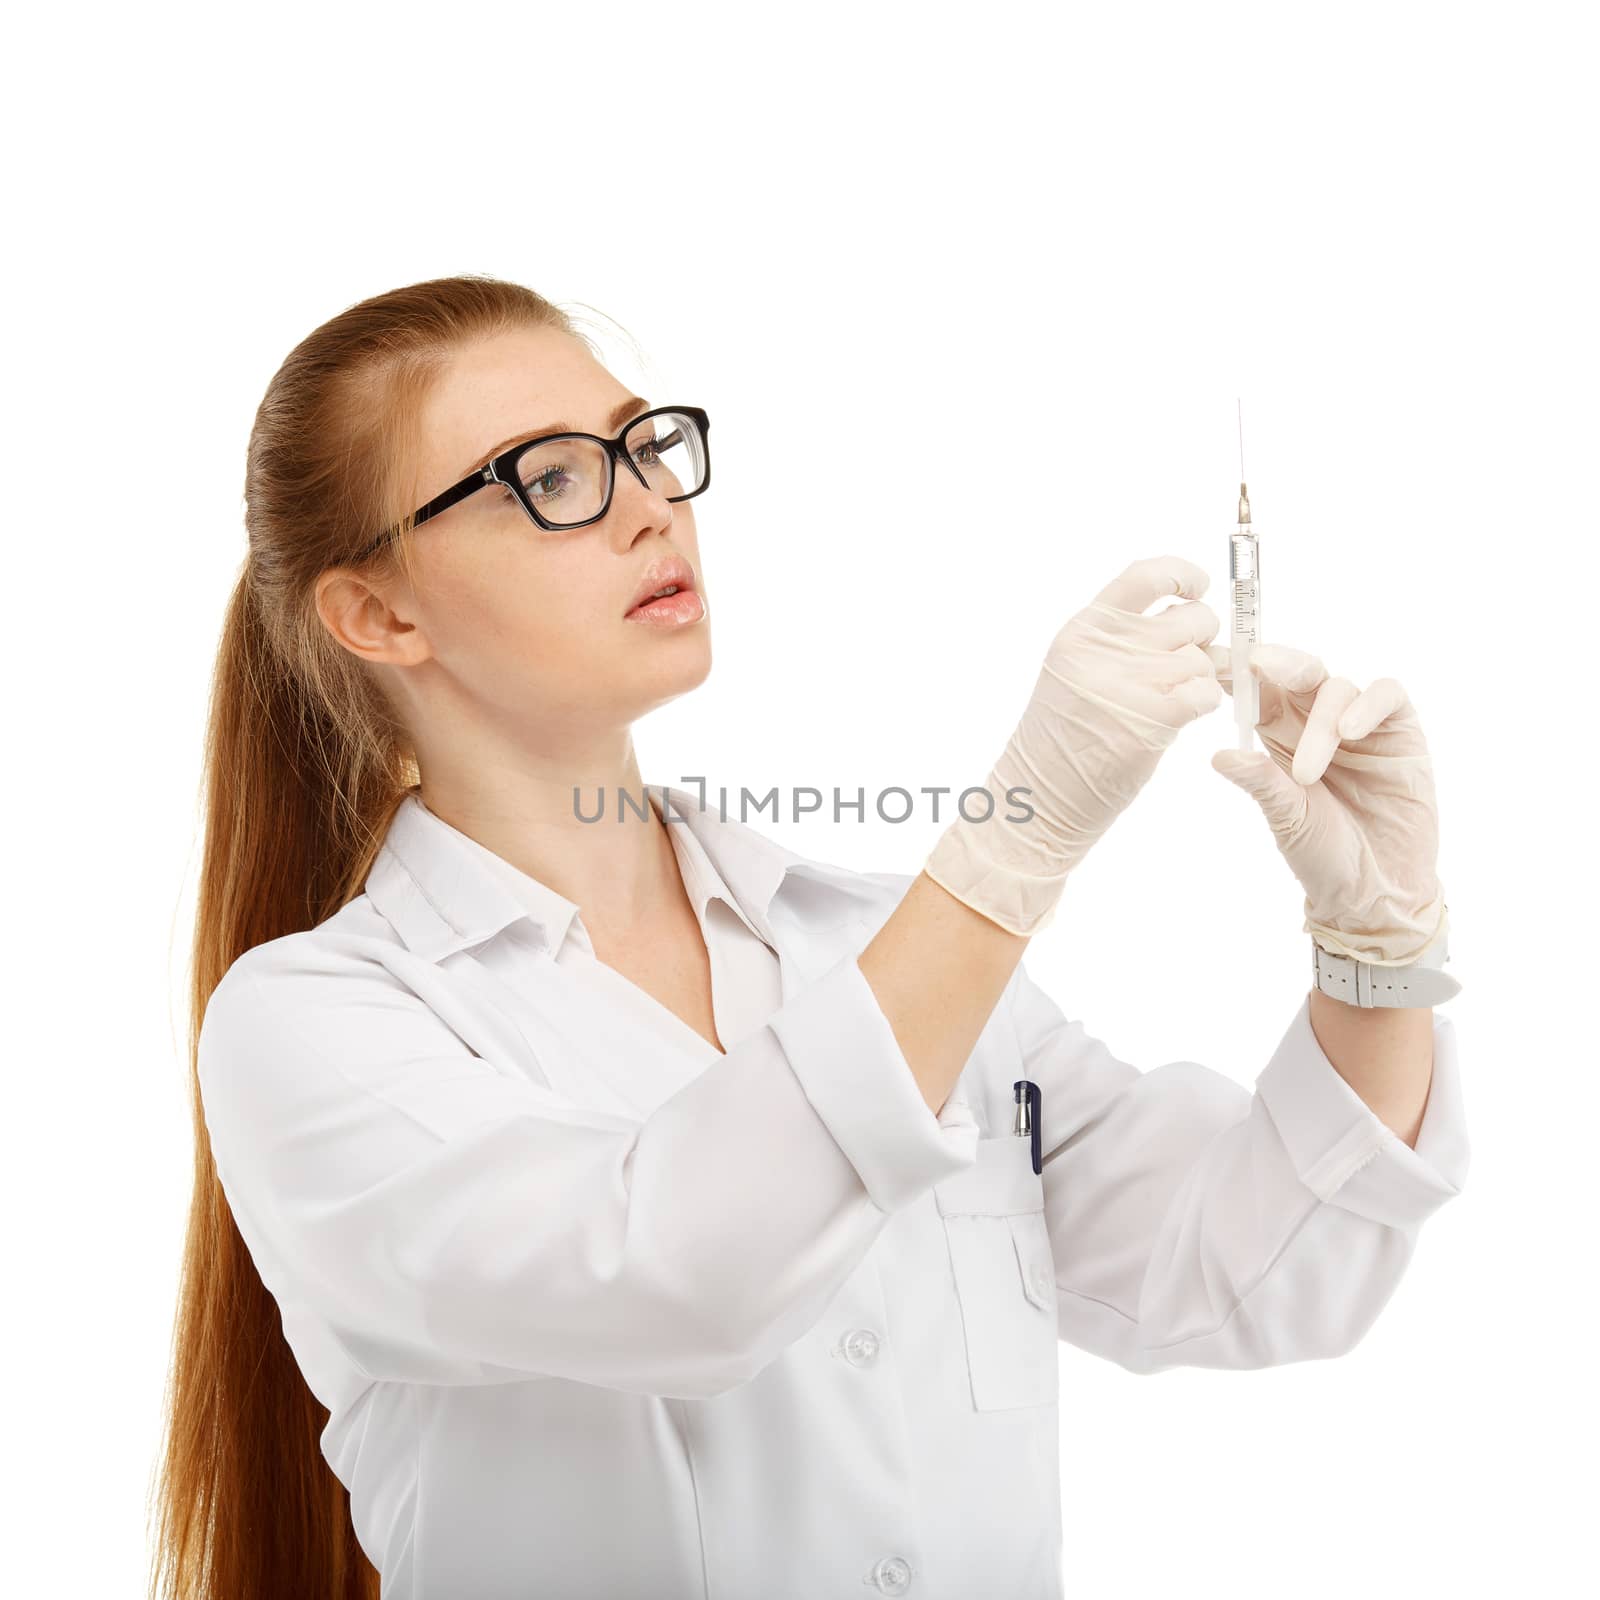 Portrait of an attractive young woman doctor with a syringe in his hand over white background